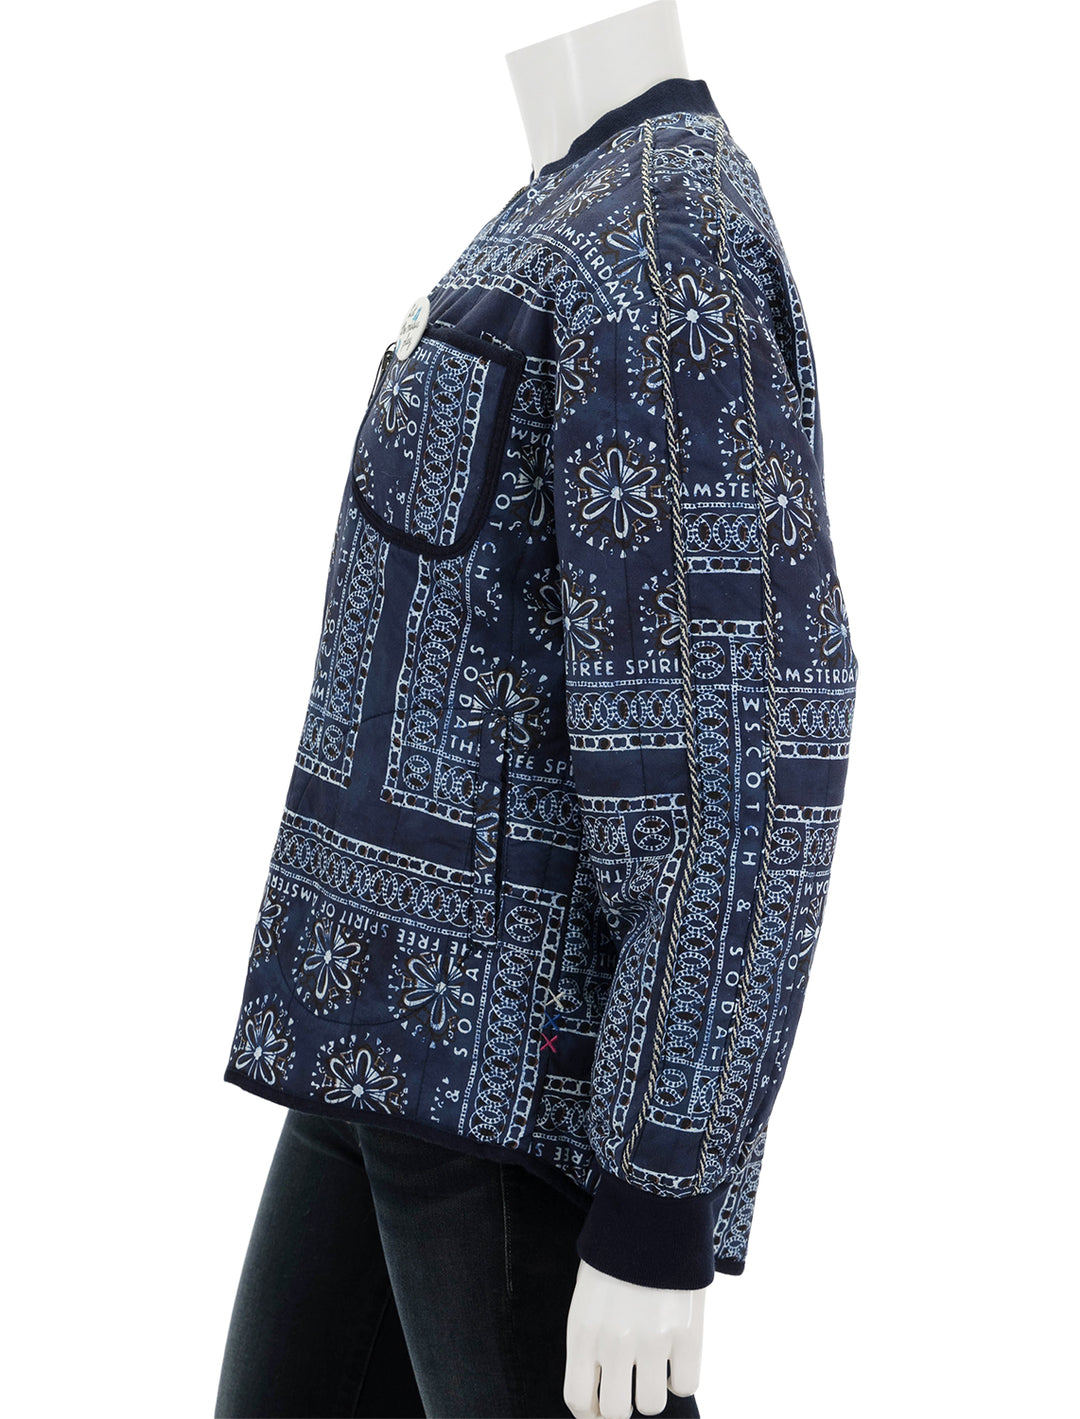 Side view of Scotch & Soda's reversible chambray bomber jacket.